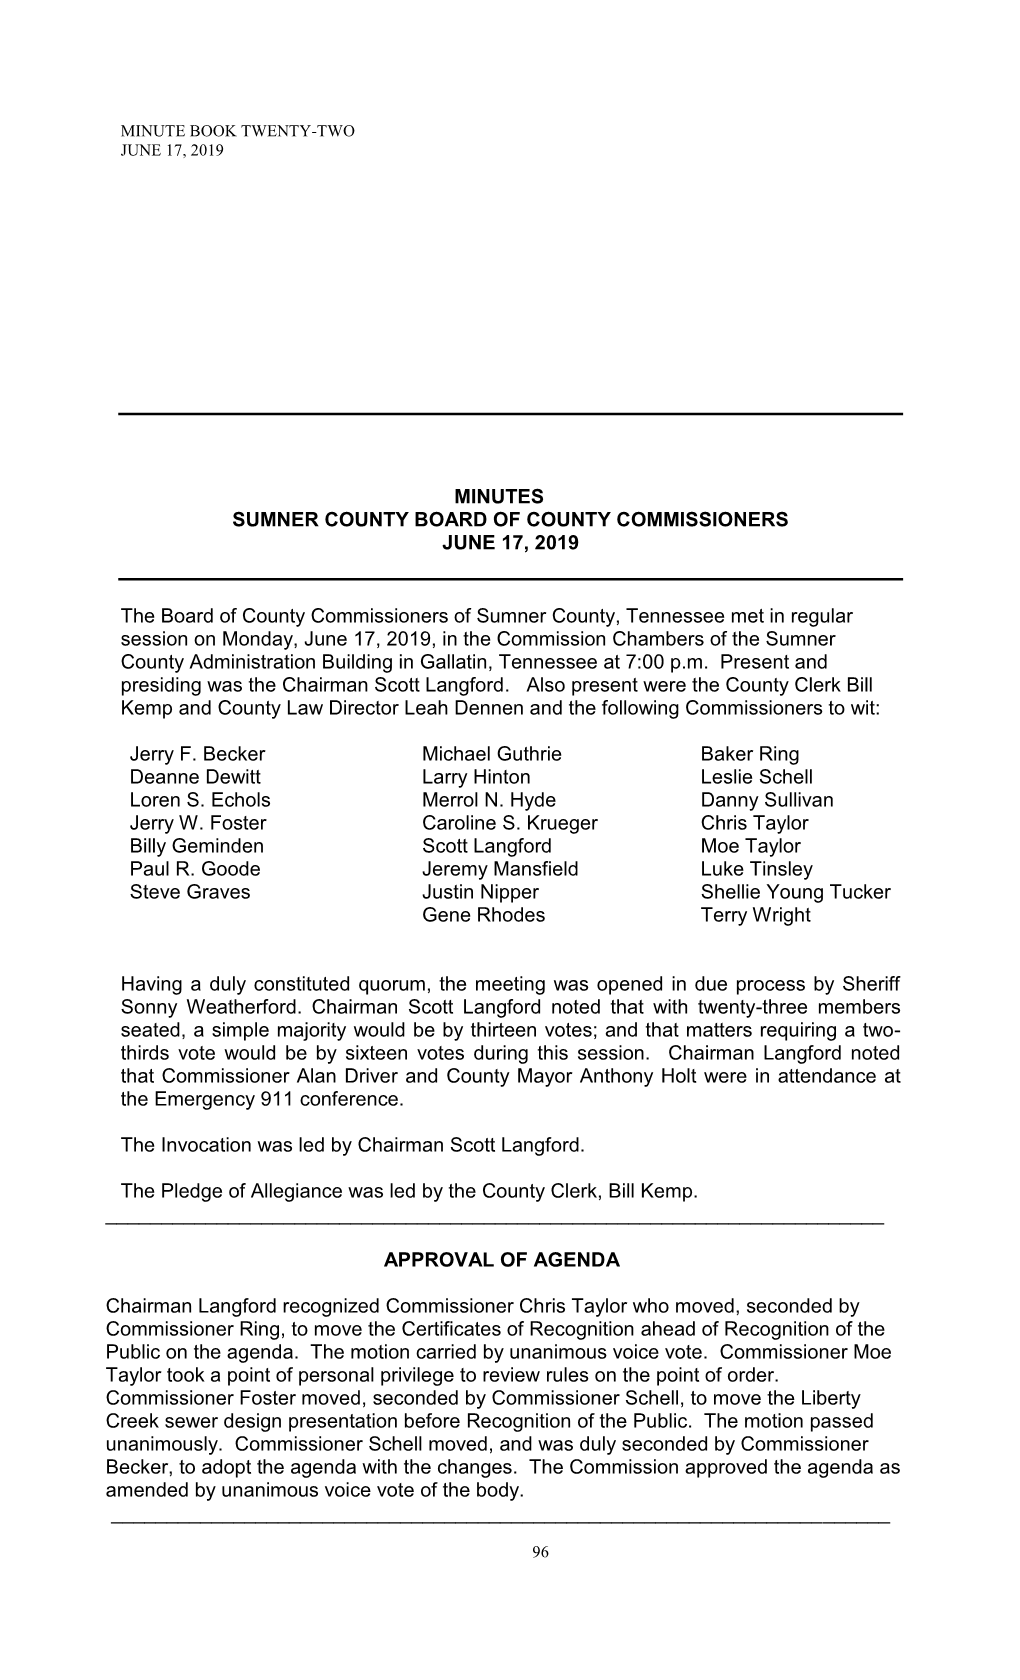 MINUTES SUMNER COUNTY BOARD of COUNTY COMMISSIONERS JUNE 17, 2019 the Board of County Commissioners of Sumner County, Tennessee